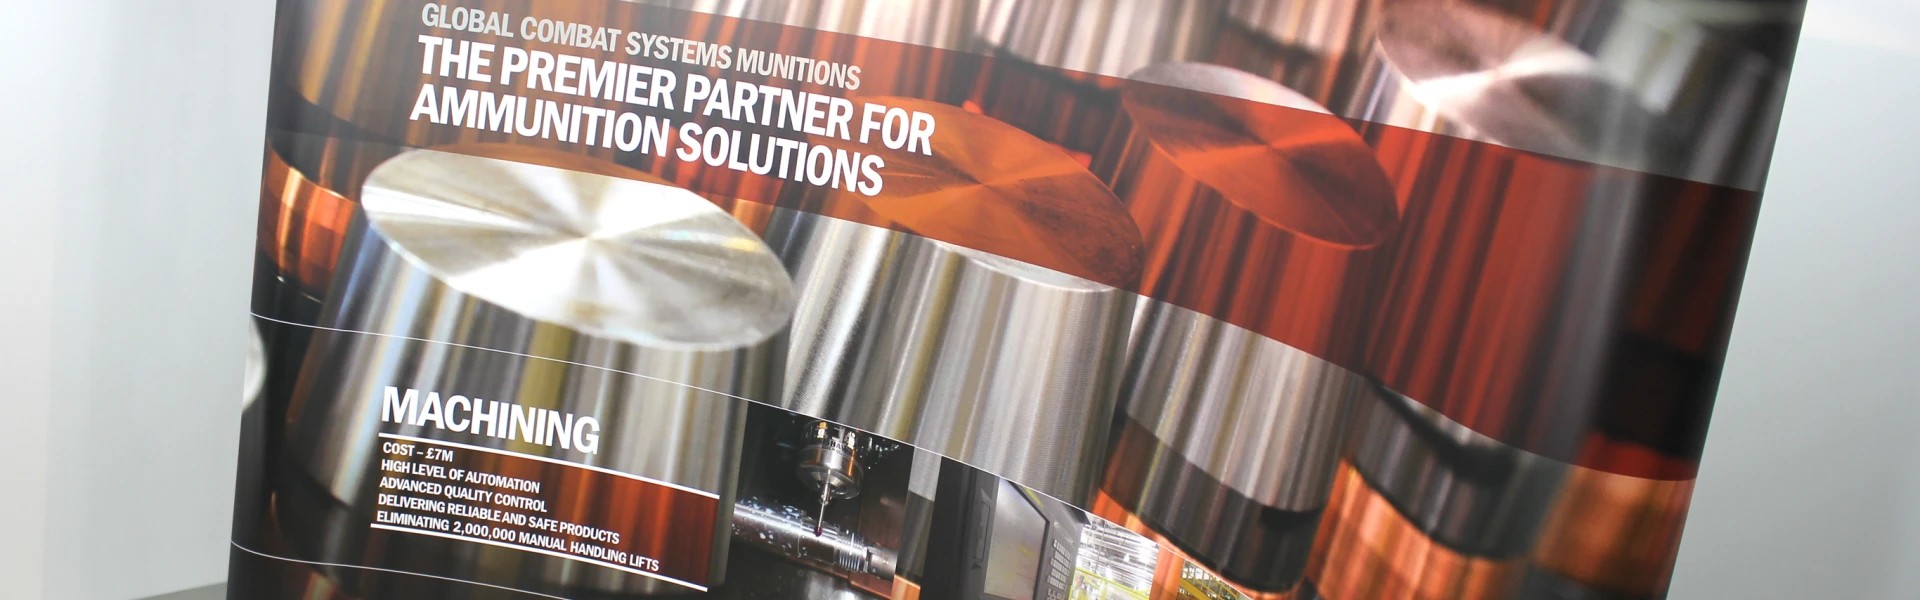 BAE Systems Munitions Exhibitions Stands